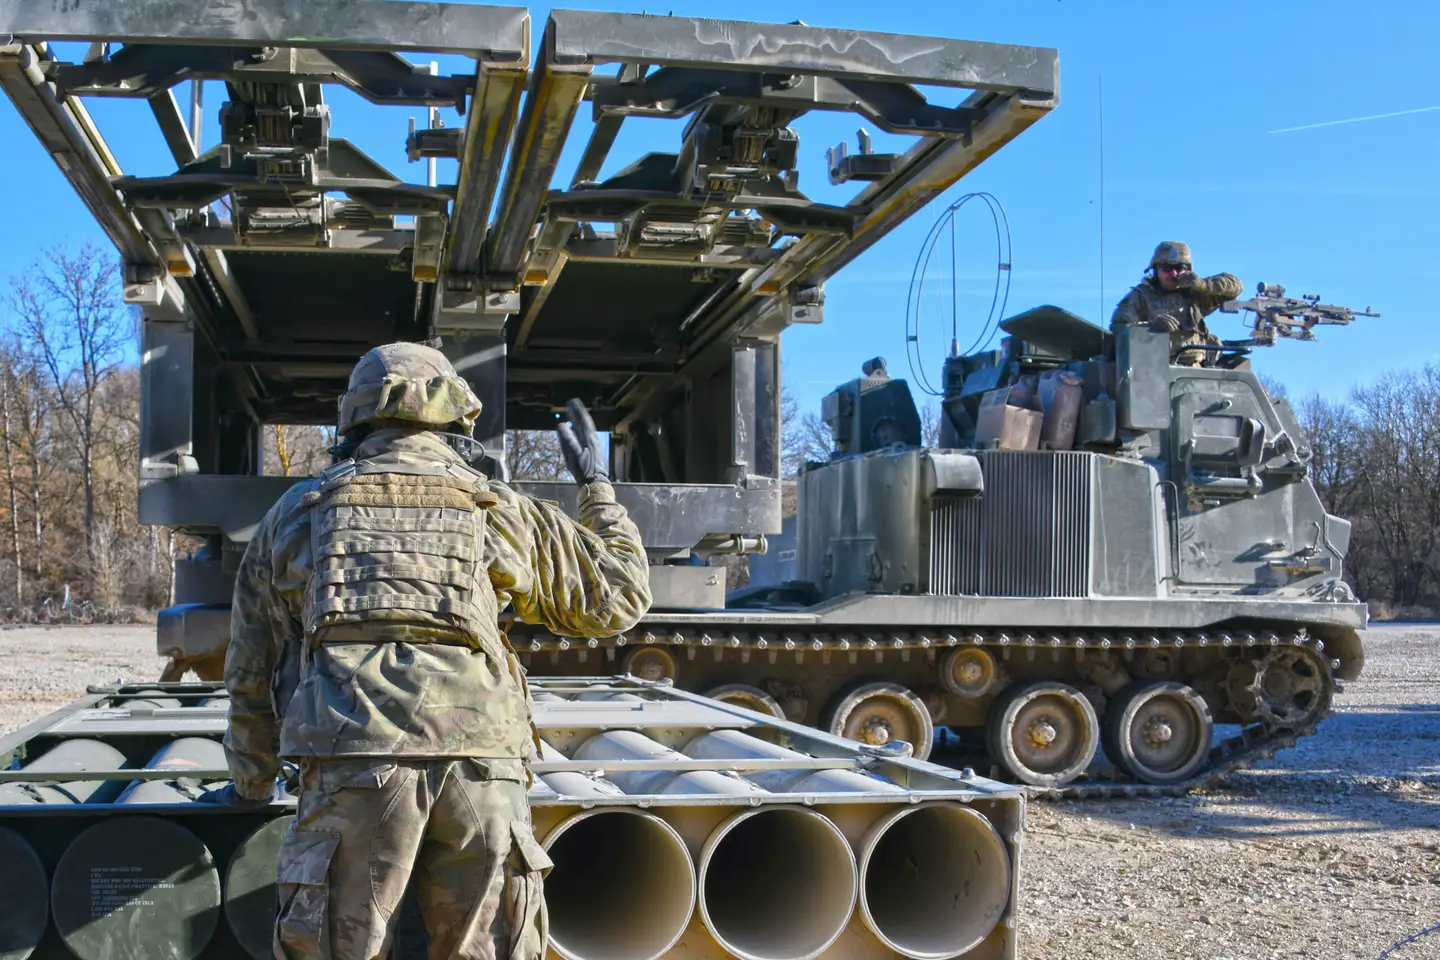 An example of an M270 multiple-launch rocket system. <em>Credit: U.S. Army photo by Gertrud Zach</em>